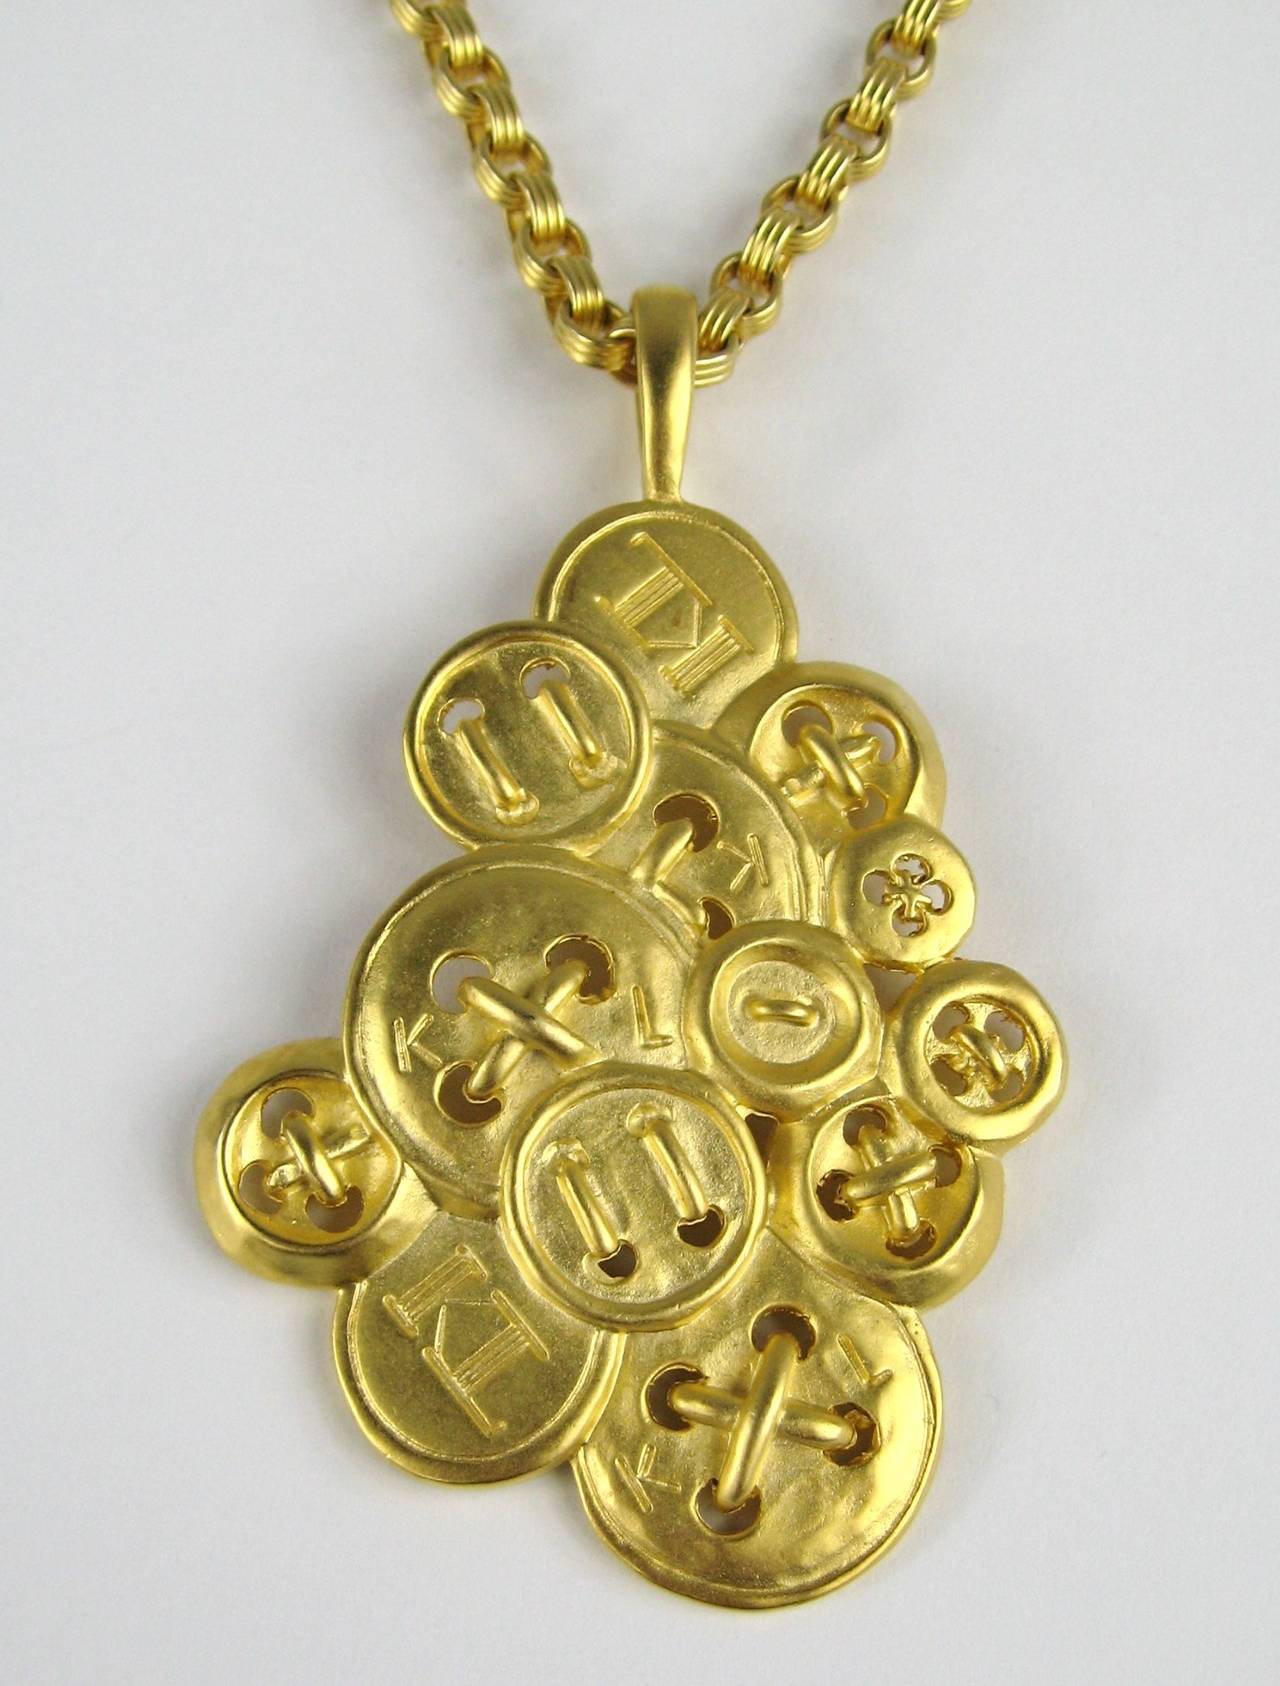 New Old Stock- (Never Worn)  Karl Lagerfeld Necklace Circa 1980s. Large Pendant of KL Buttons. Measuring 3.64 inches x 2.28 inches. Chain is 38 inches end to end with Adjustable length. This is out of a massive collection of New Old stock items as